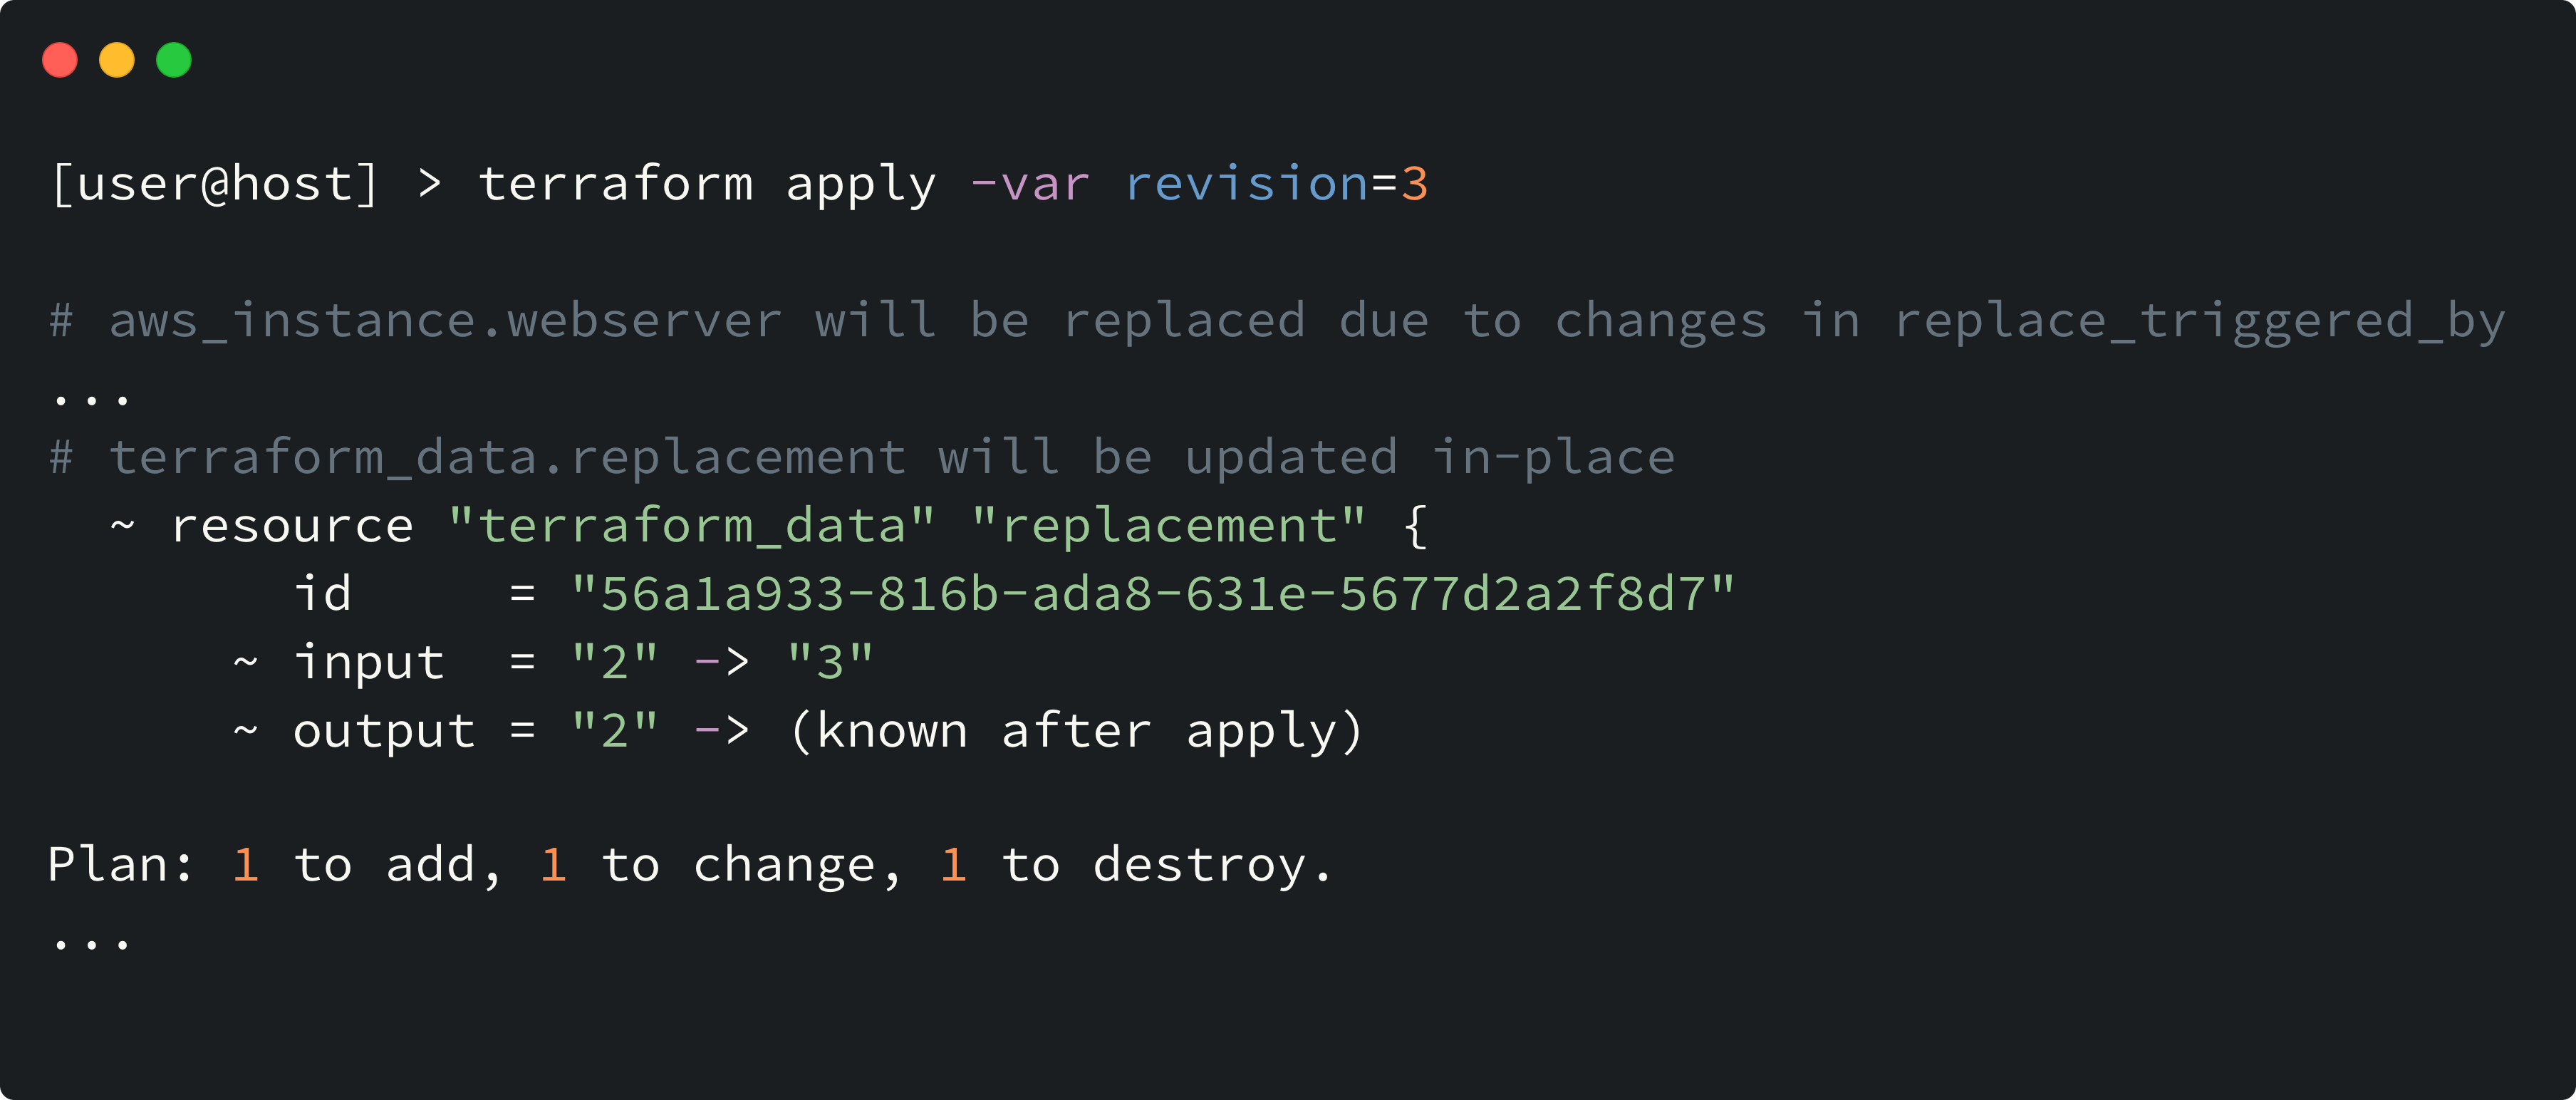 terraform_data with replace_triggered_by